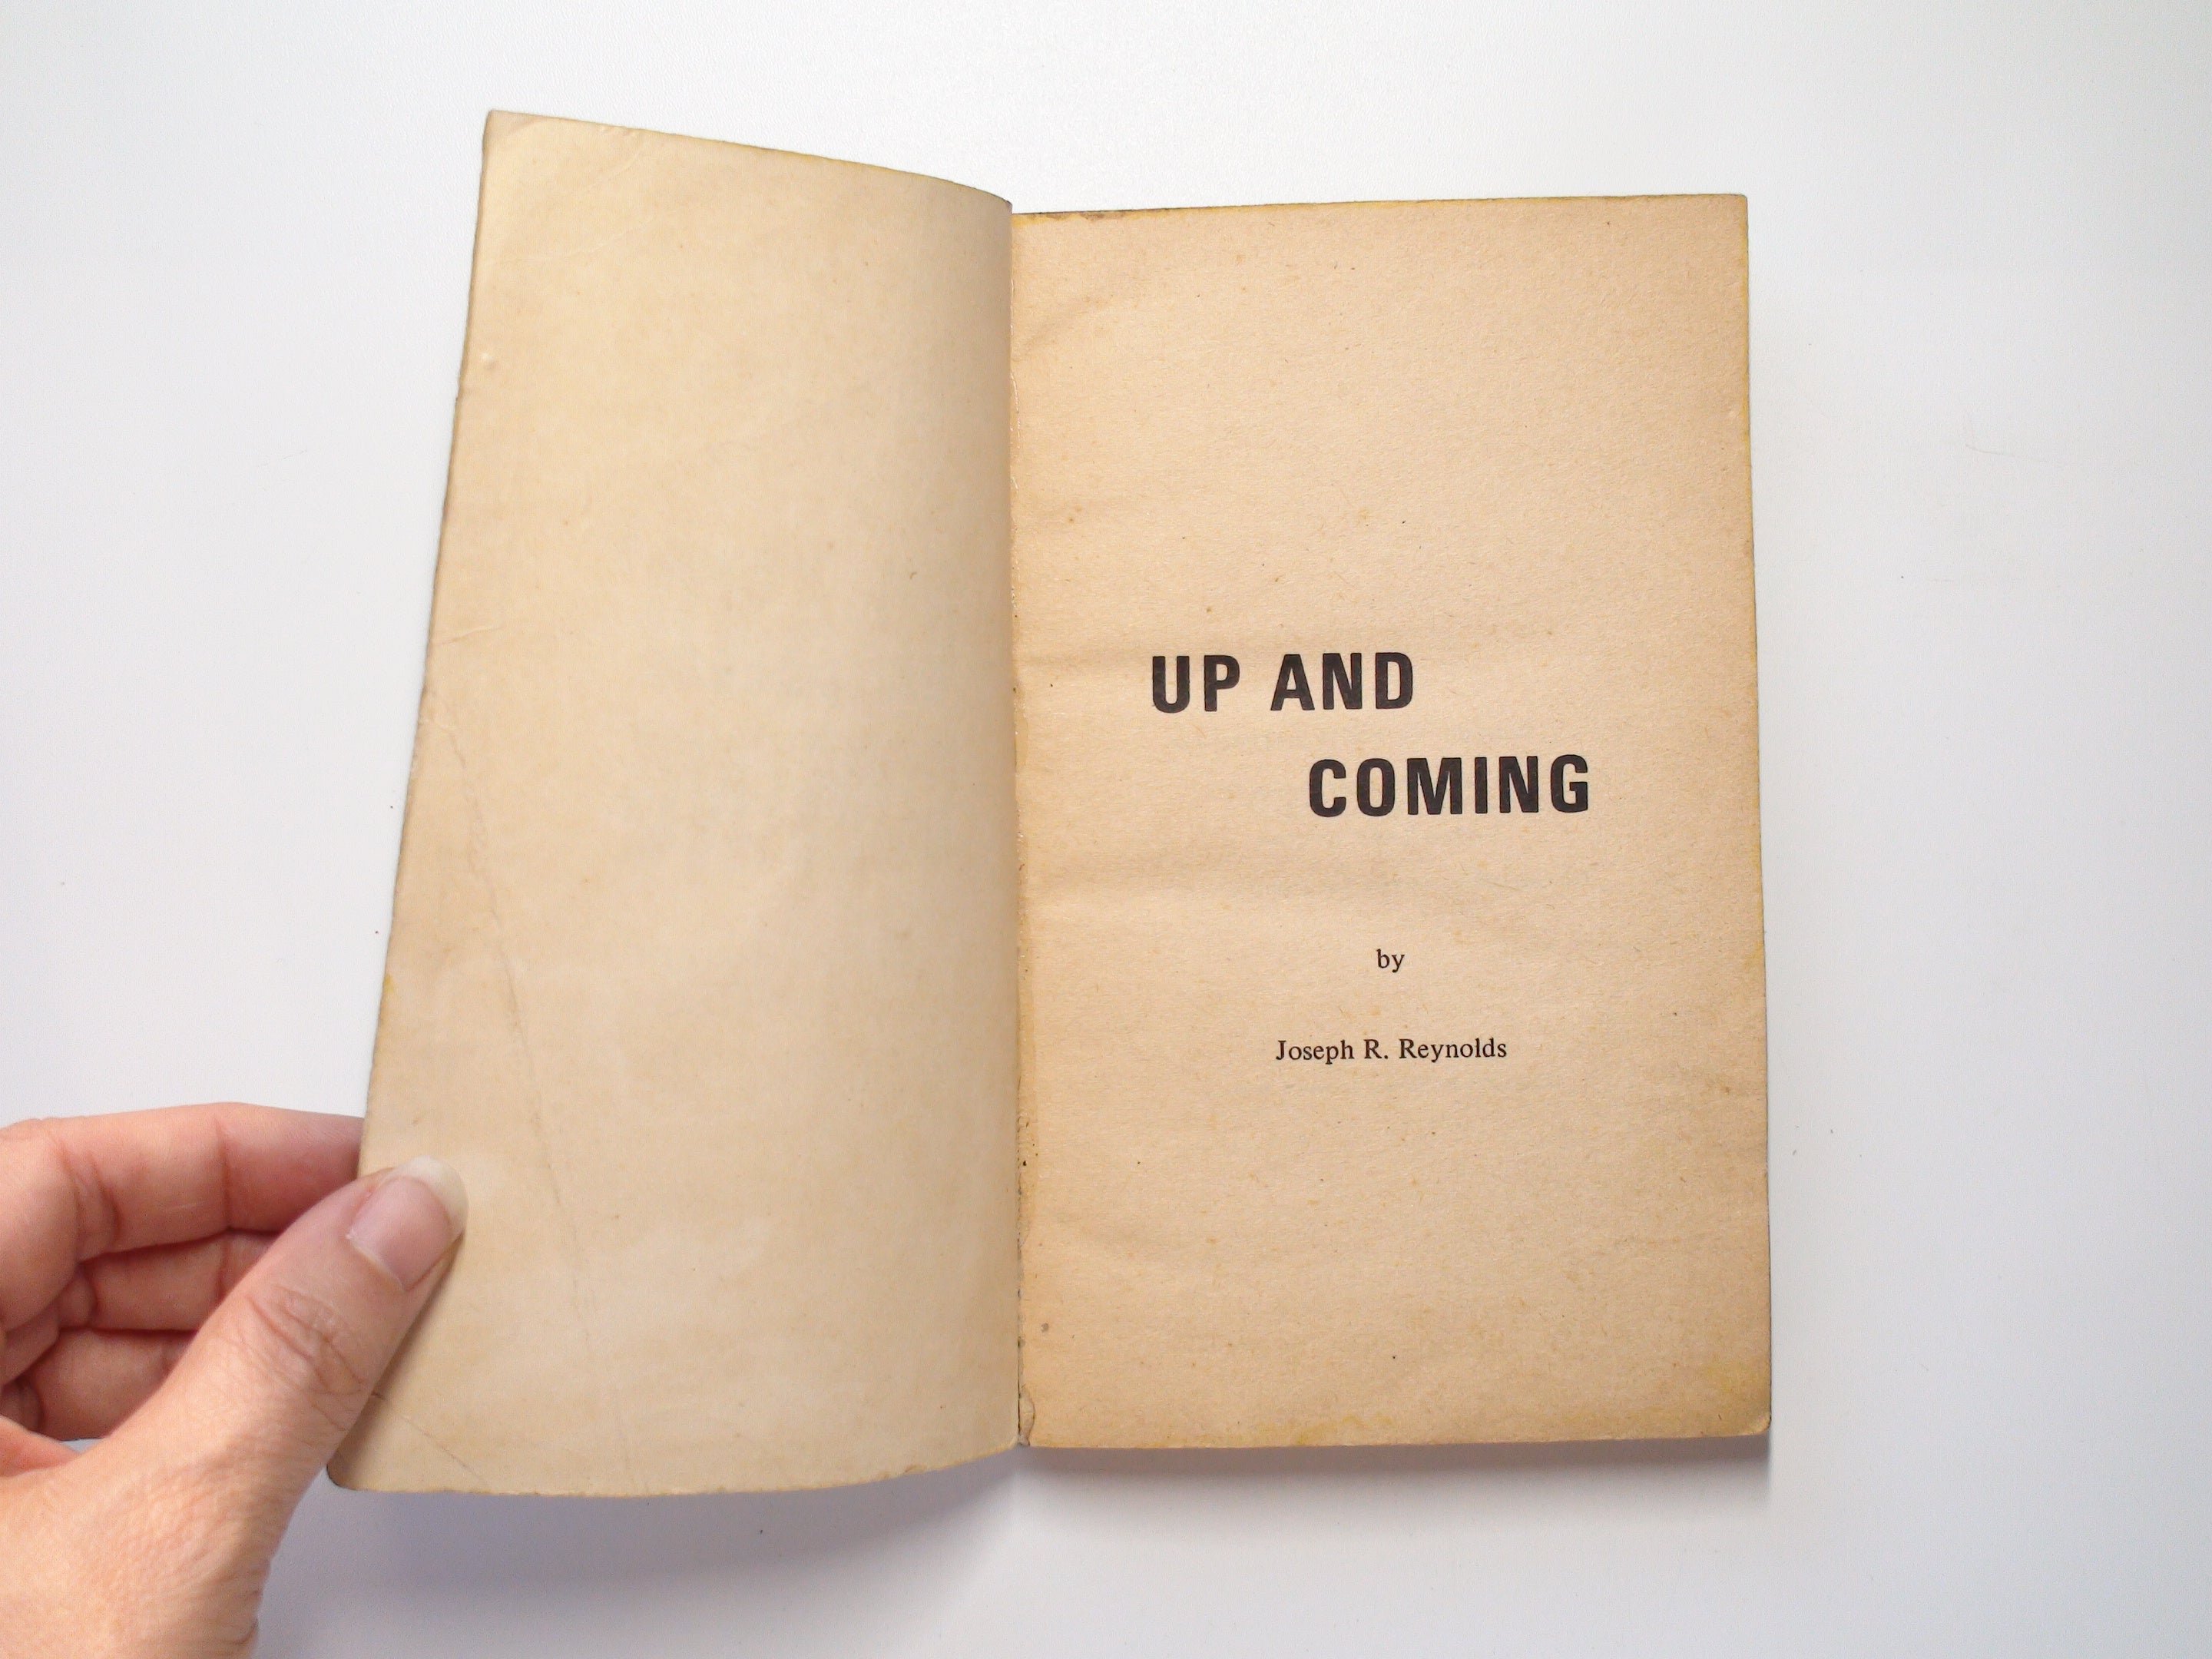 Up and Coming, by Joseph Reynolds, An Orpheus Original Erotic Novel, 1970